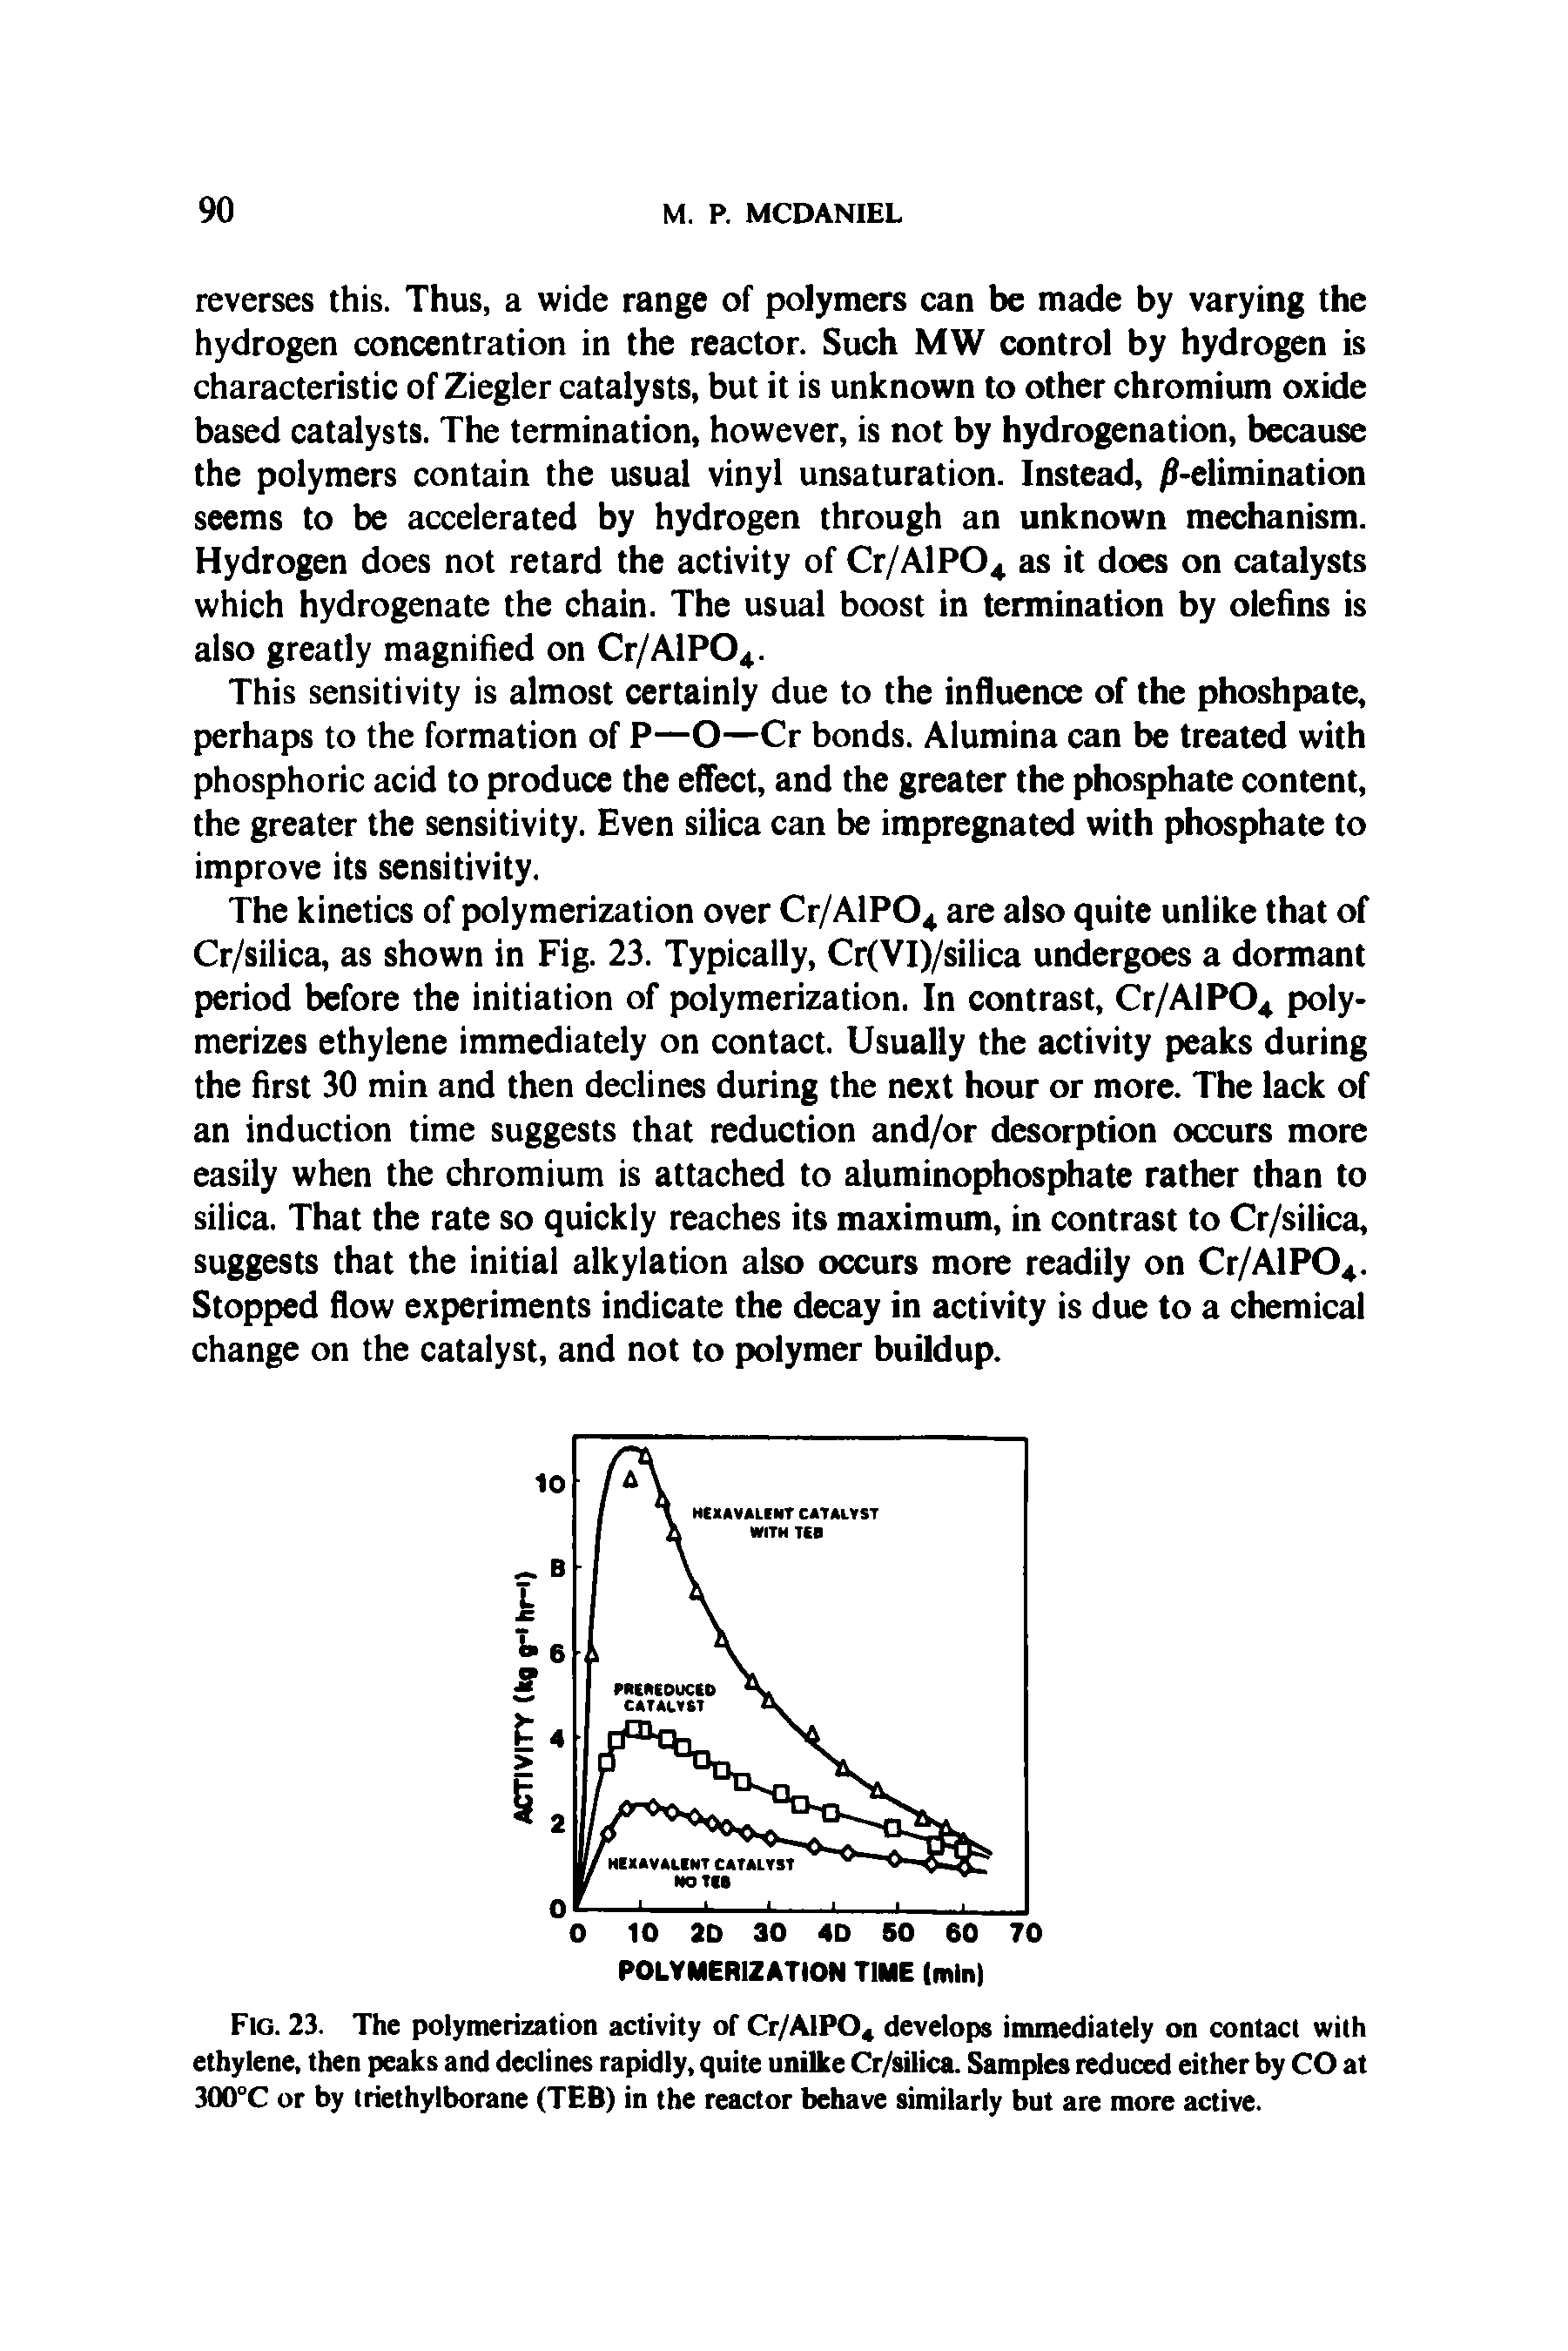 Fig. 23. The polymerization activity of Cr/AlPO develops immediately on contact with ethylene, then peaks and declines rapidly, quite unilke Cr/silica. Samples reduced either by CO at 300°C or by triethylborane (TEB) in the reactor behave similarly but are more active.